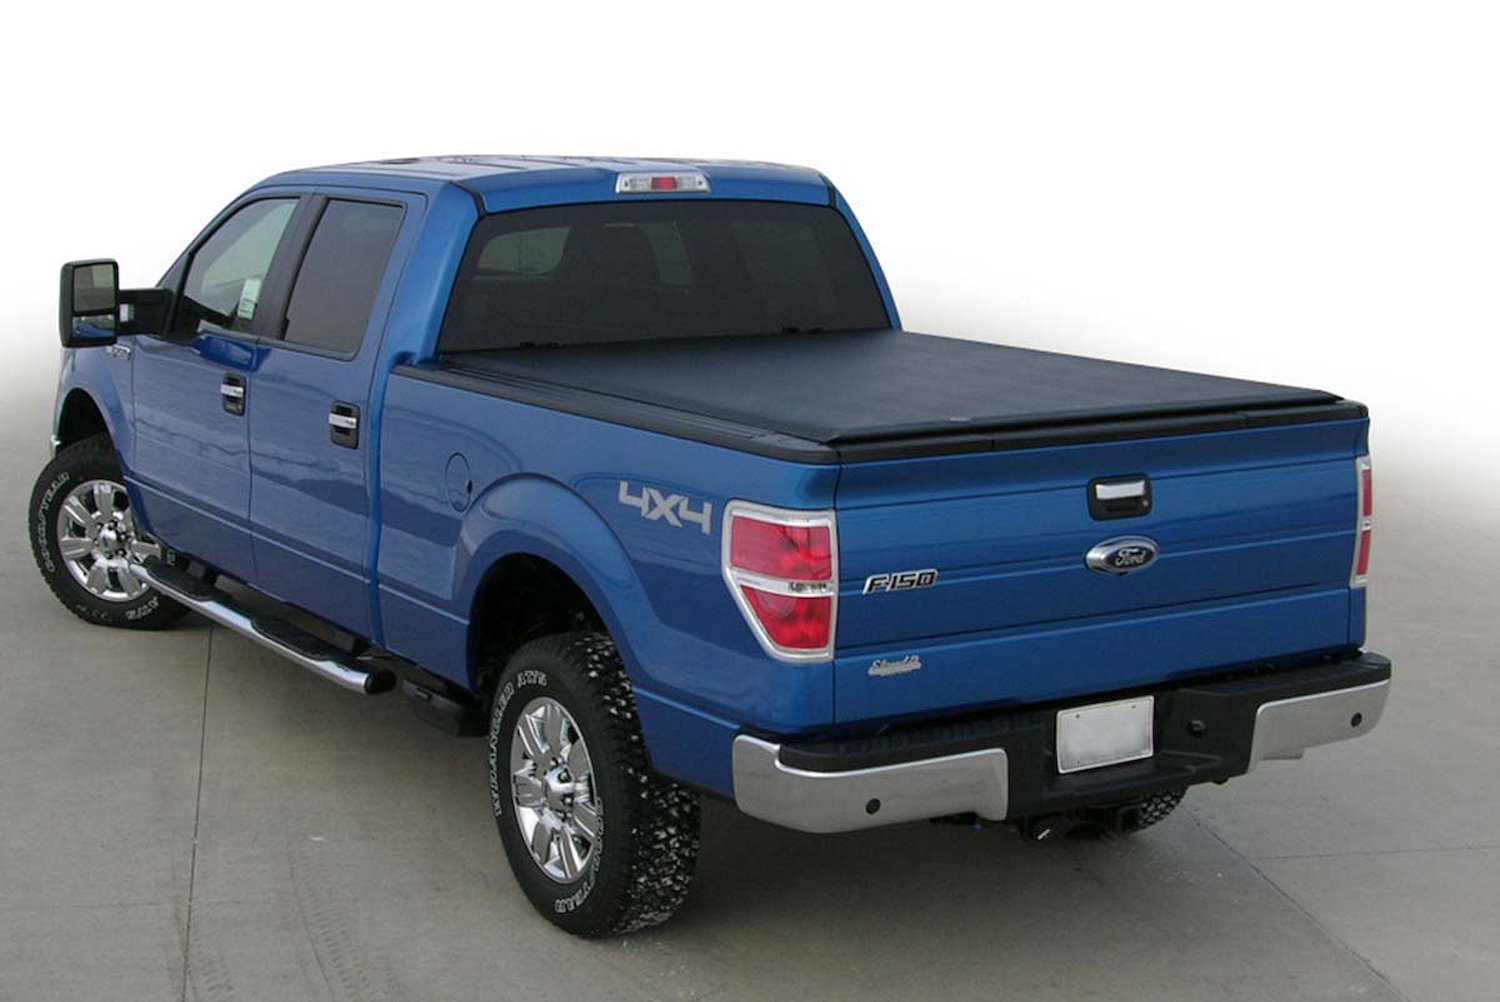 LORADO Roll-Up Tonneau Cover, 2008-2016 Ford F-250/F-350/F-450, with 8 ft. Bed